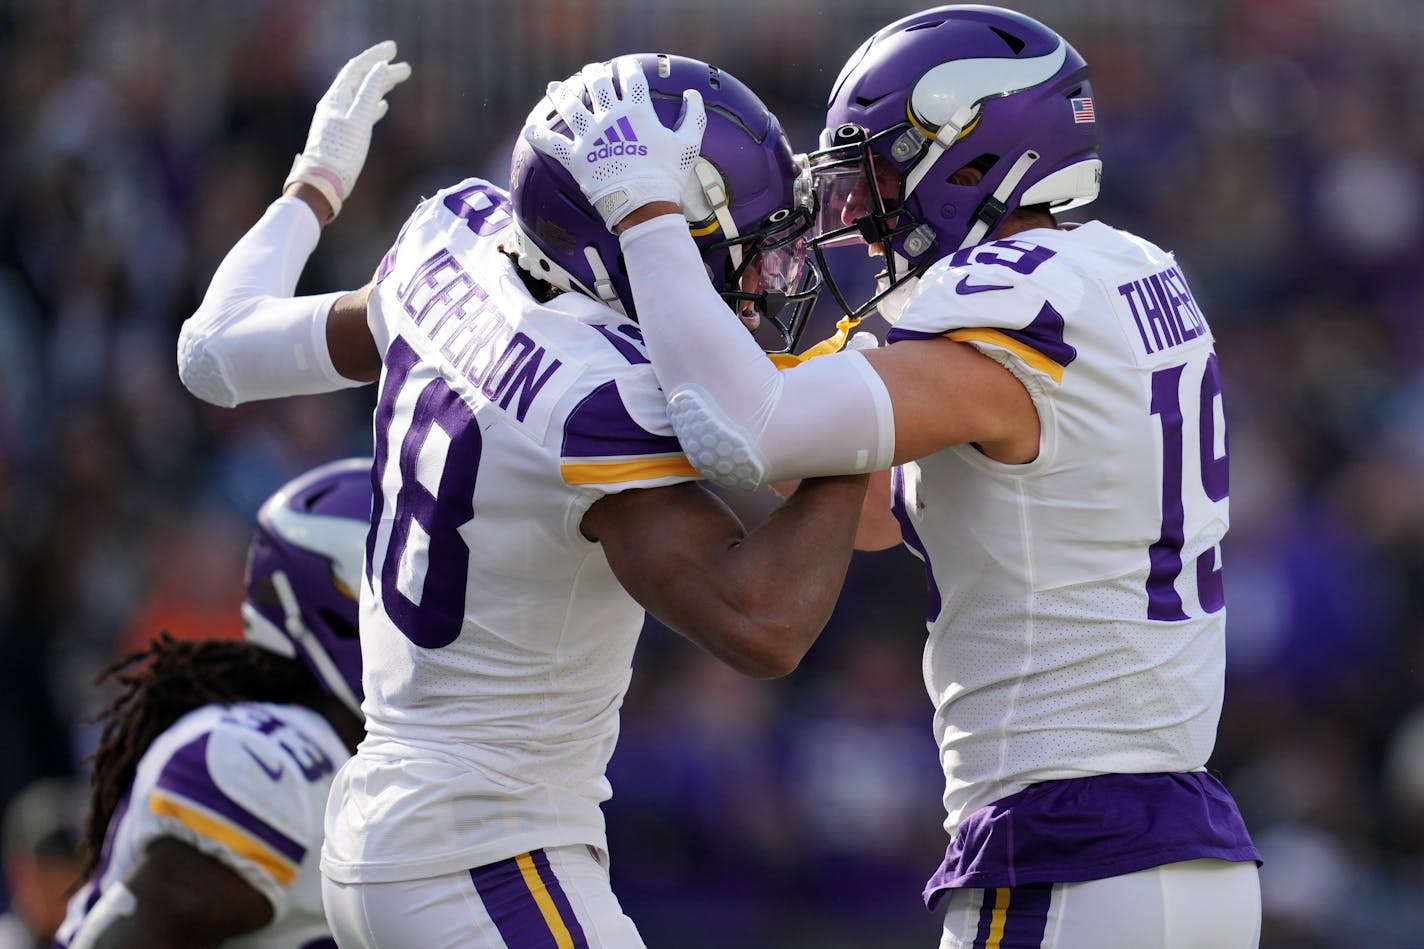 Vikings wide receiver Justin Jefferson (18) celebrates with fellow wide receiver Adam Thielen (19) after running in a 50-yard touchdown pass from quarterback Kirk Cousins (8) in the first quarter of an NFL game between the Minnesota Vikings and the Baltimore Ravens Sunday, Nov. 7, 2021 at M&amp;T Bank Stadium in Baltimore, Md. ] ANTHONY SOUFFLE • anthony.souffle@startribune.com